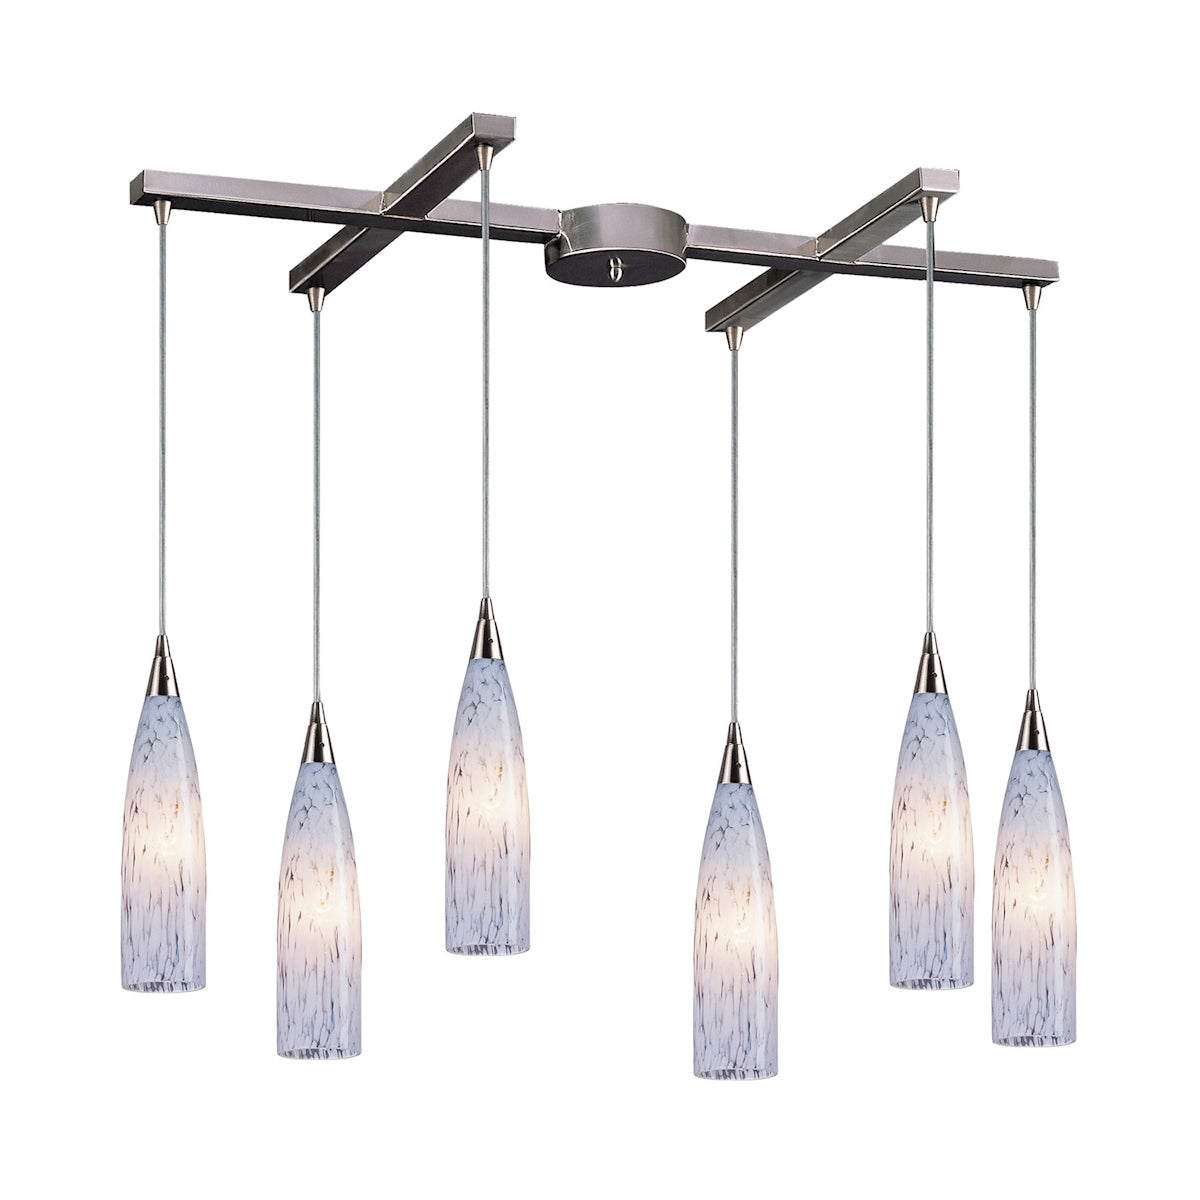 ELK Lighting 501-6SW Lungo 6-Light H-Bar Pendant Fixture in Satin Nickel with Snow White Glass